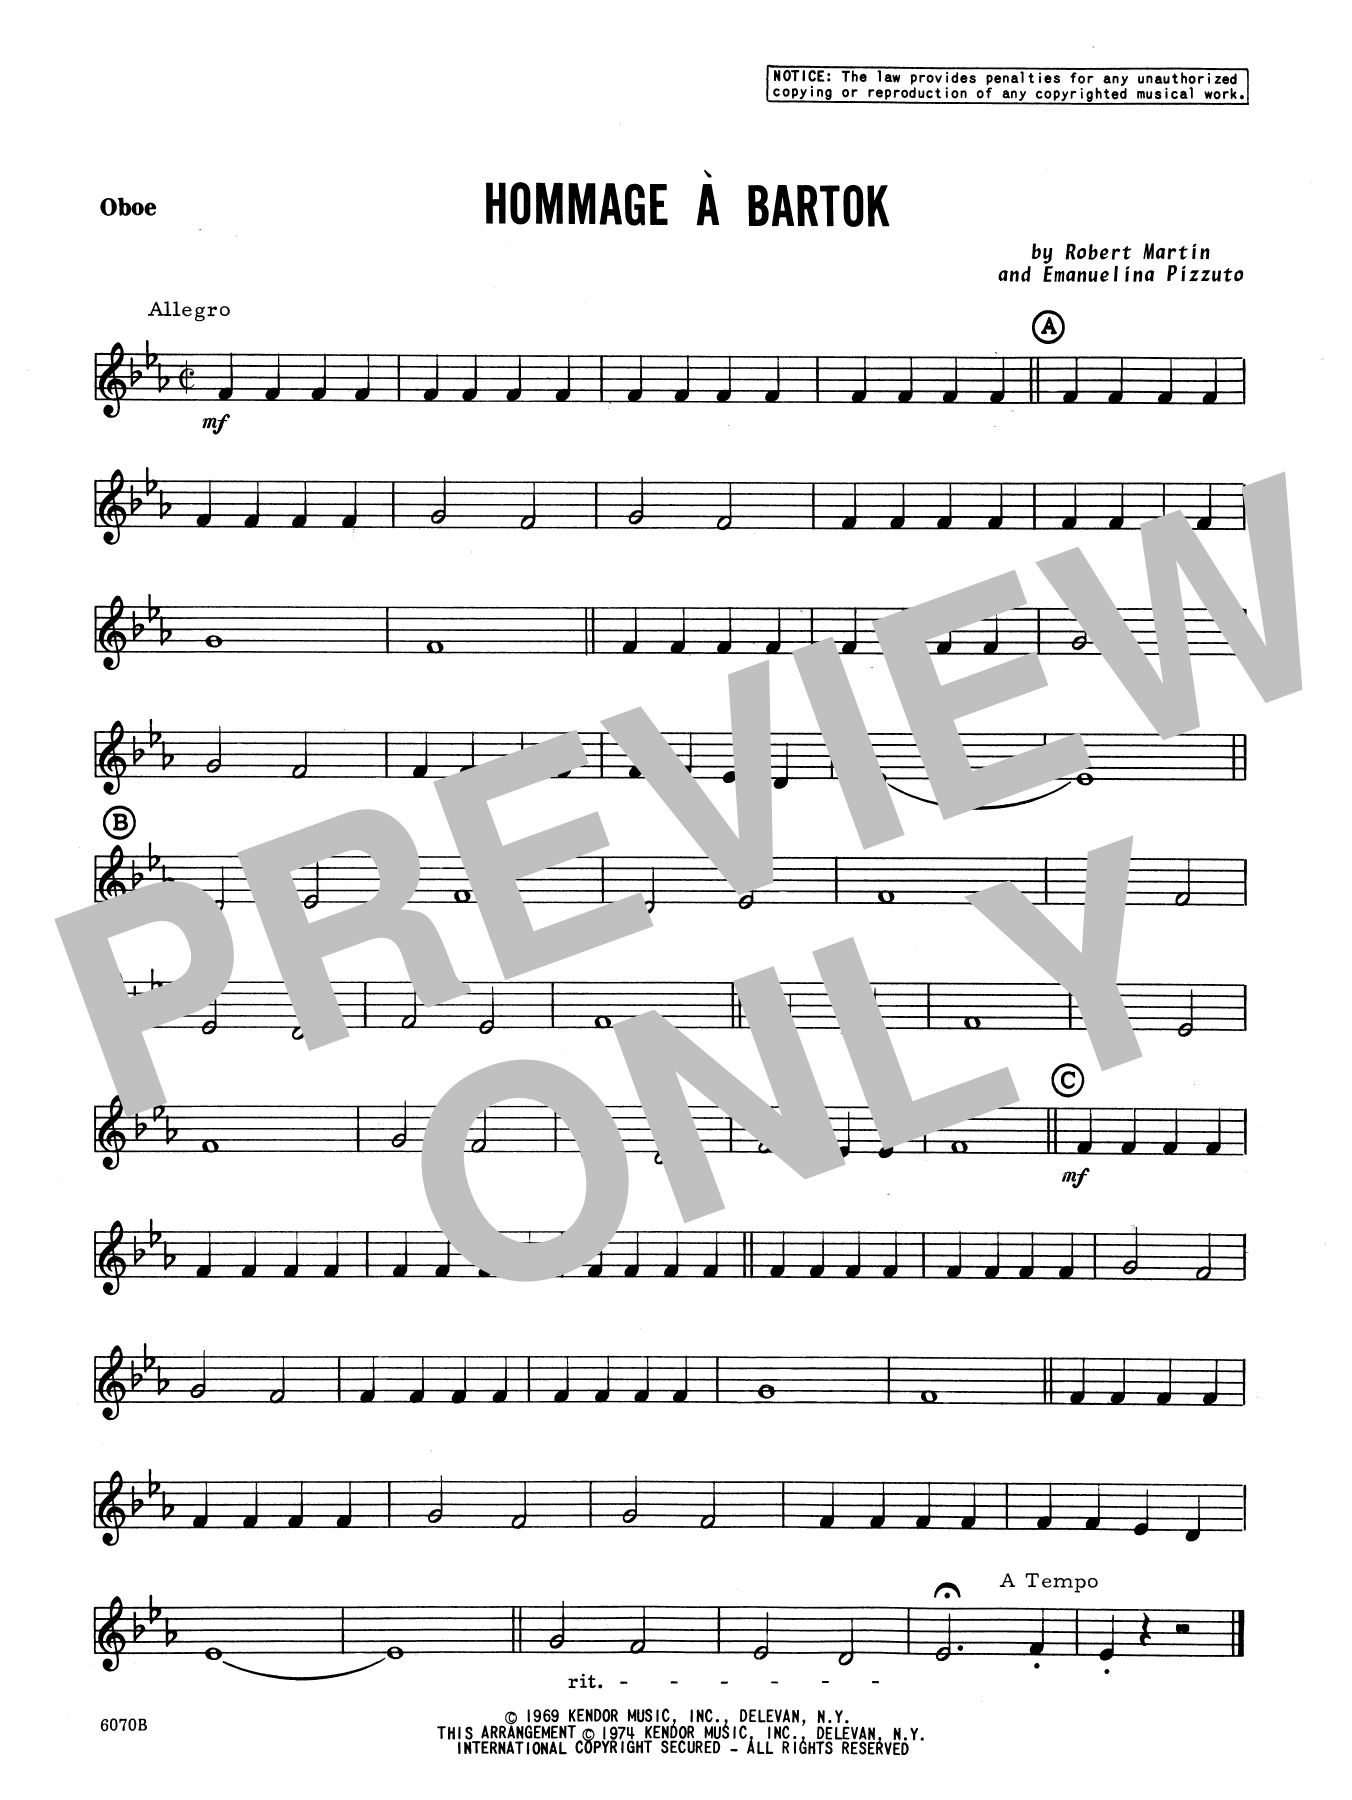 Martin Hommage A Bartok - Oboe sheet music notes and chords. Download Printable PDF.